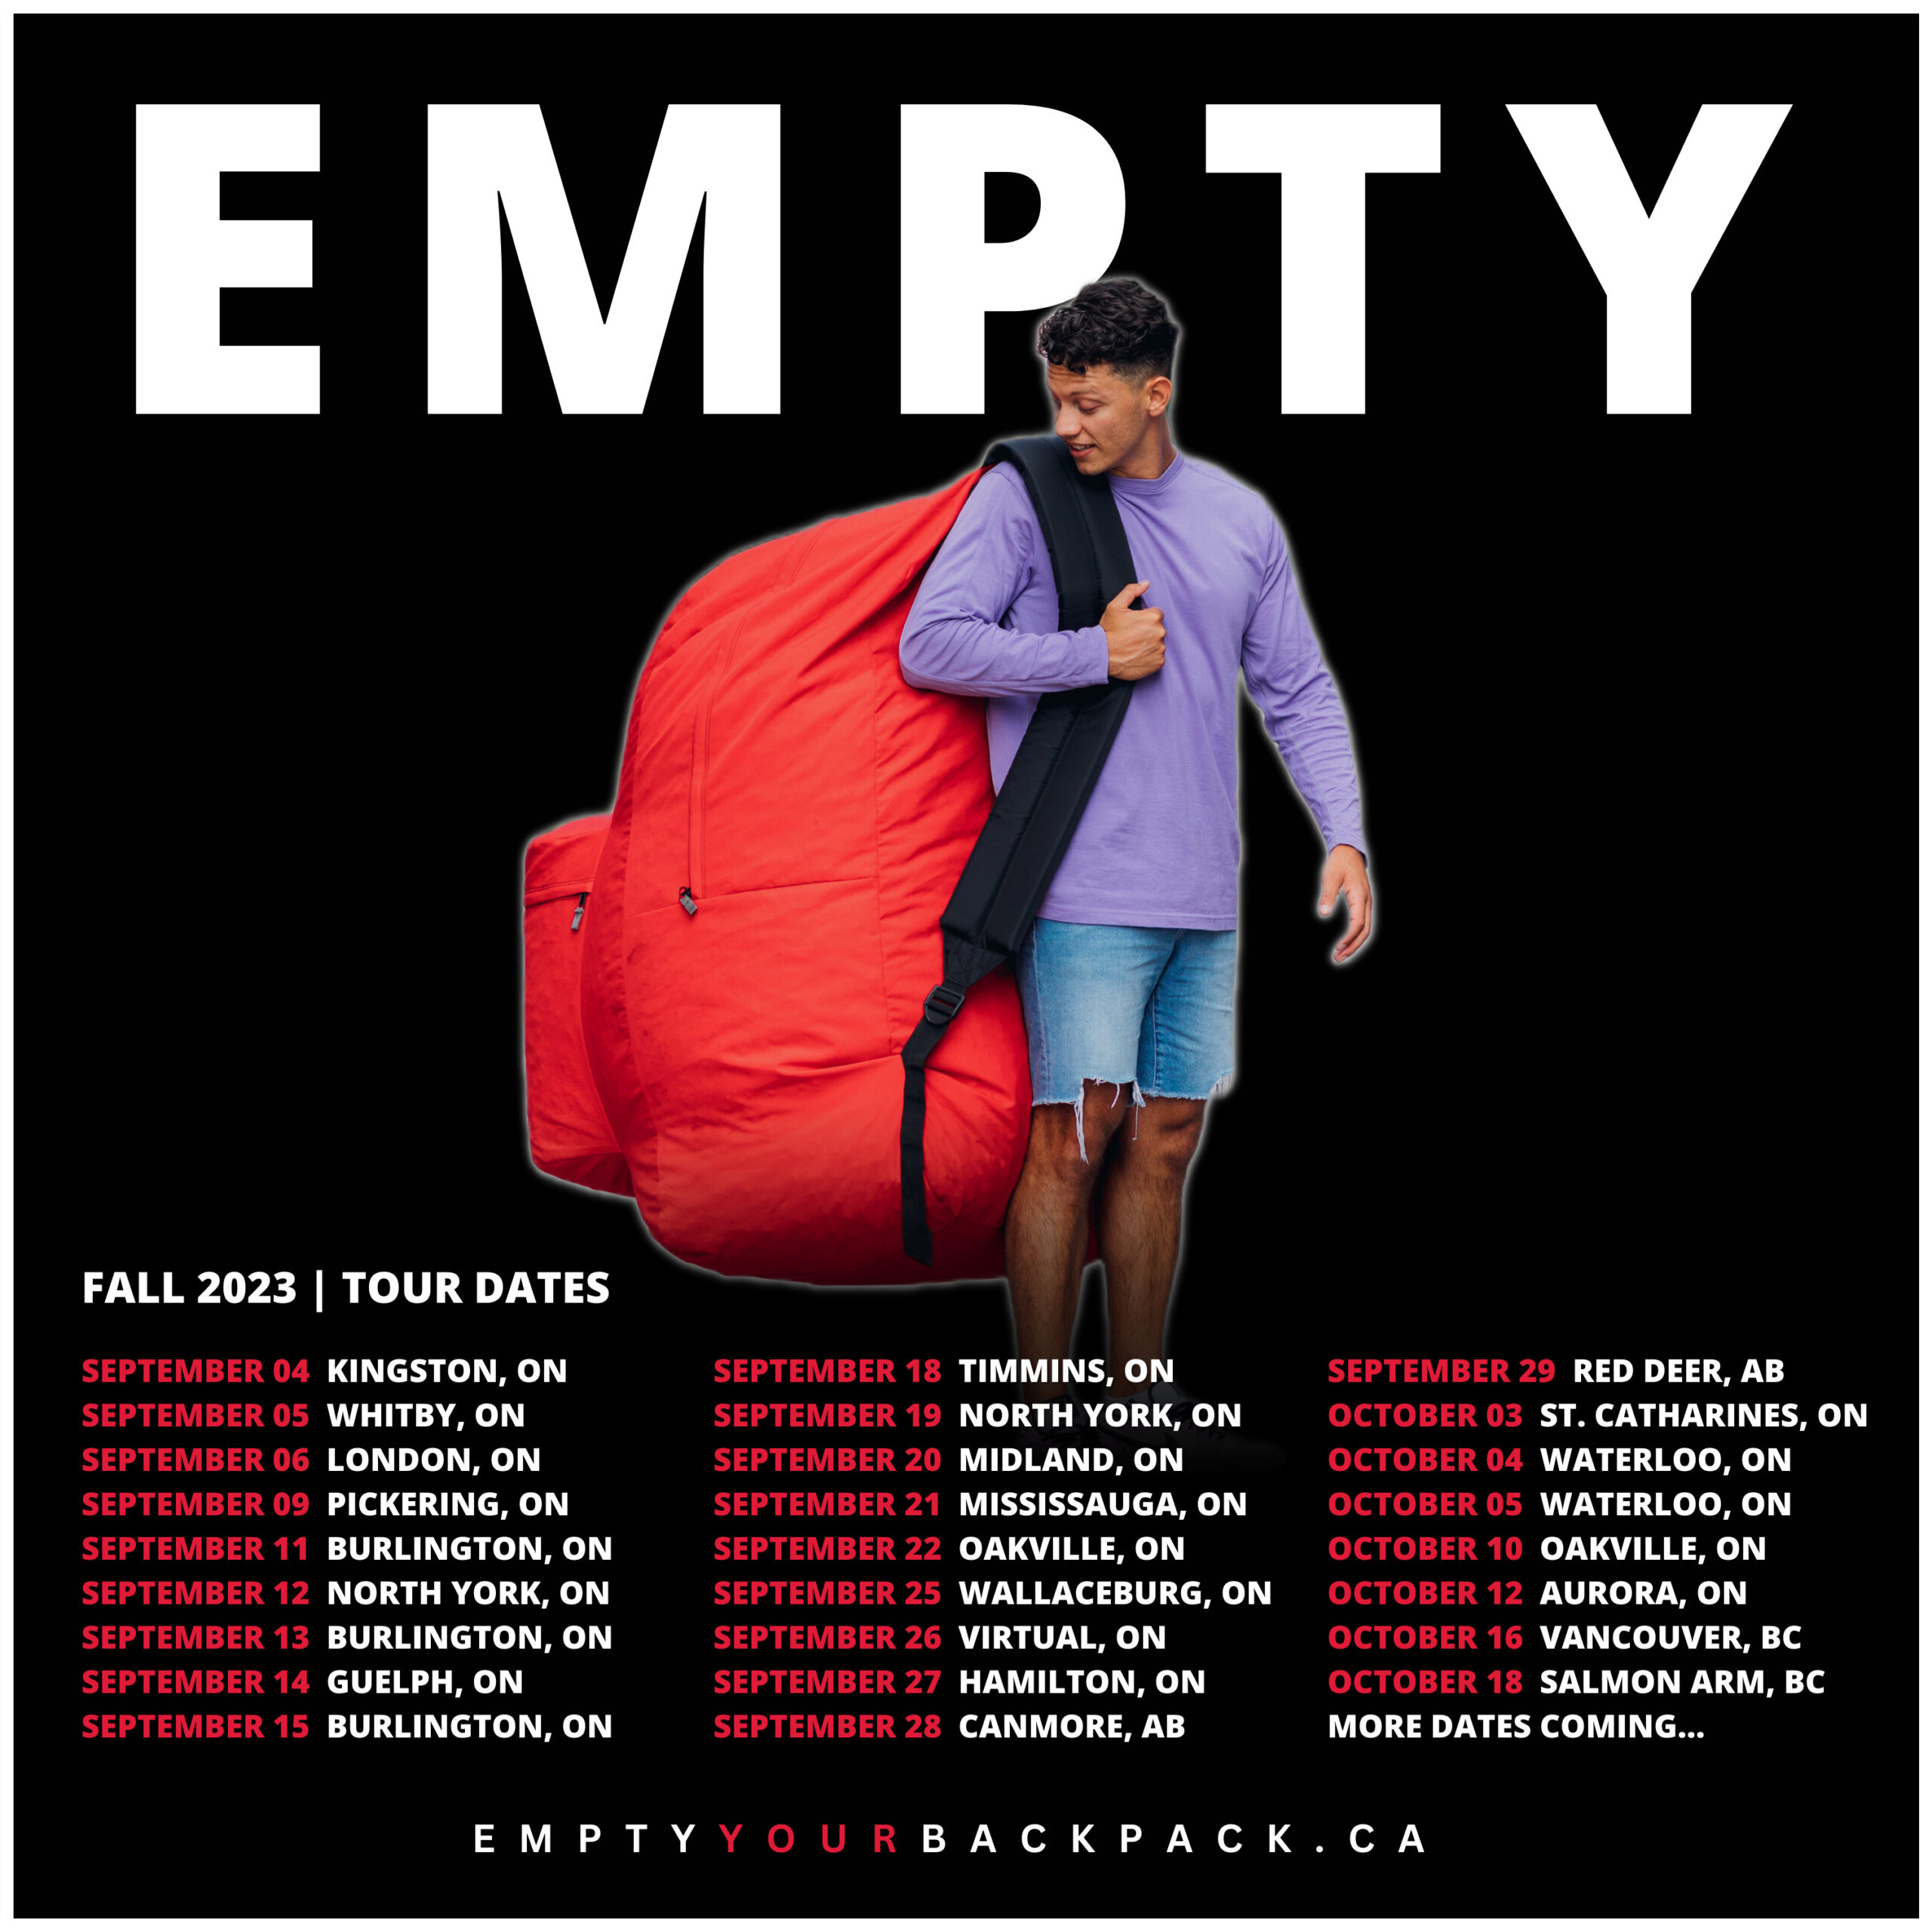 Empty Your Backpack 2023 Fall Tour Poster